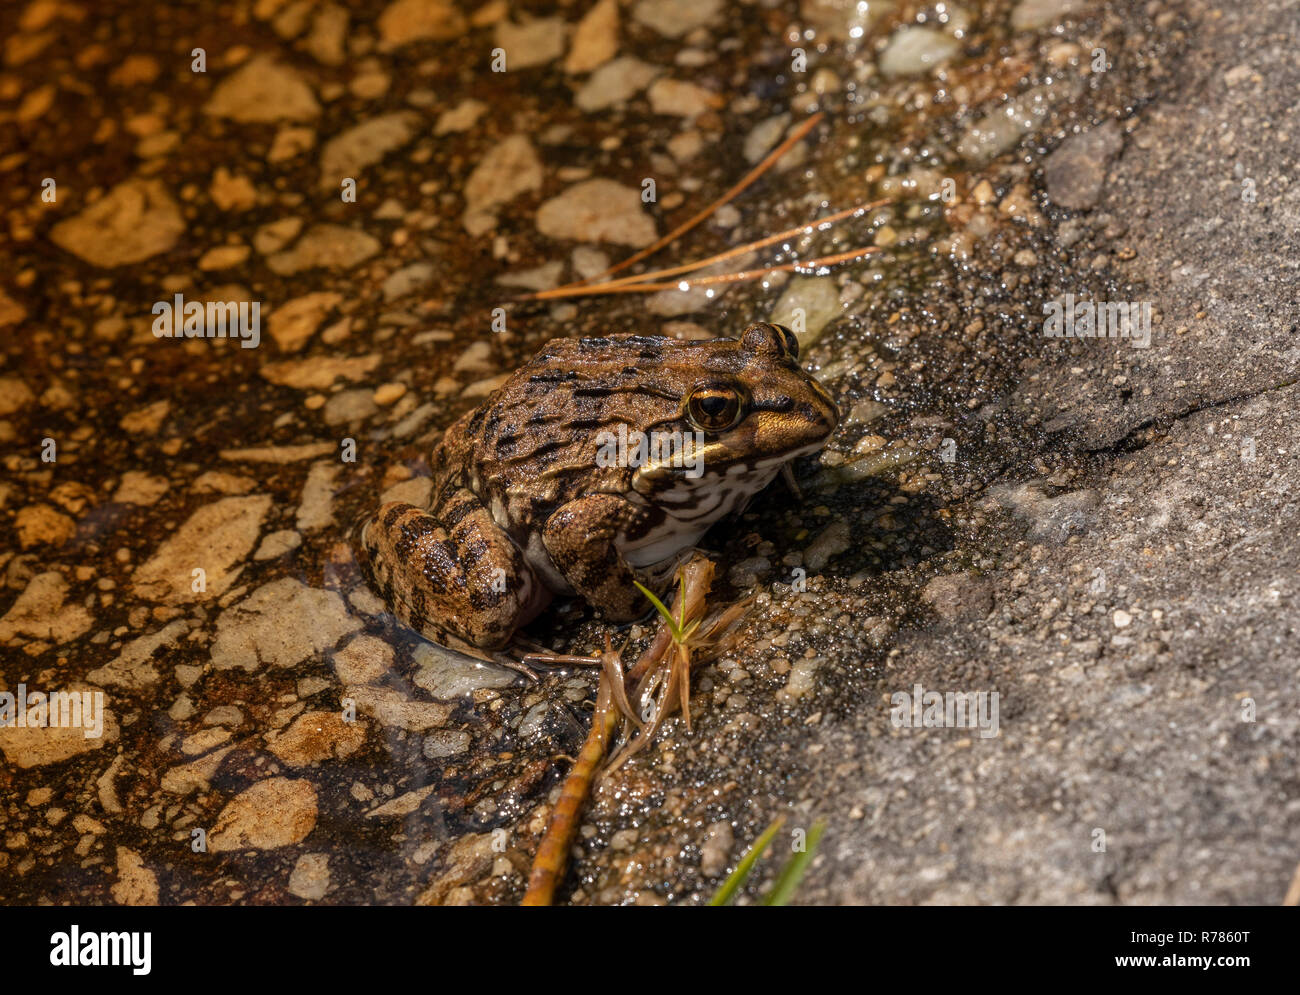 Cape River Frog, Amietia fuscigula on edge of pond in spring, Western Cape, South Africa. Stock Photo